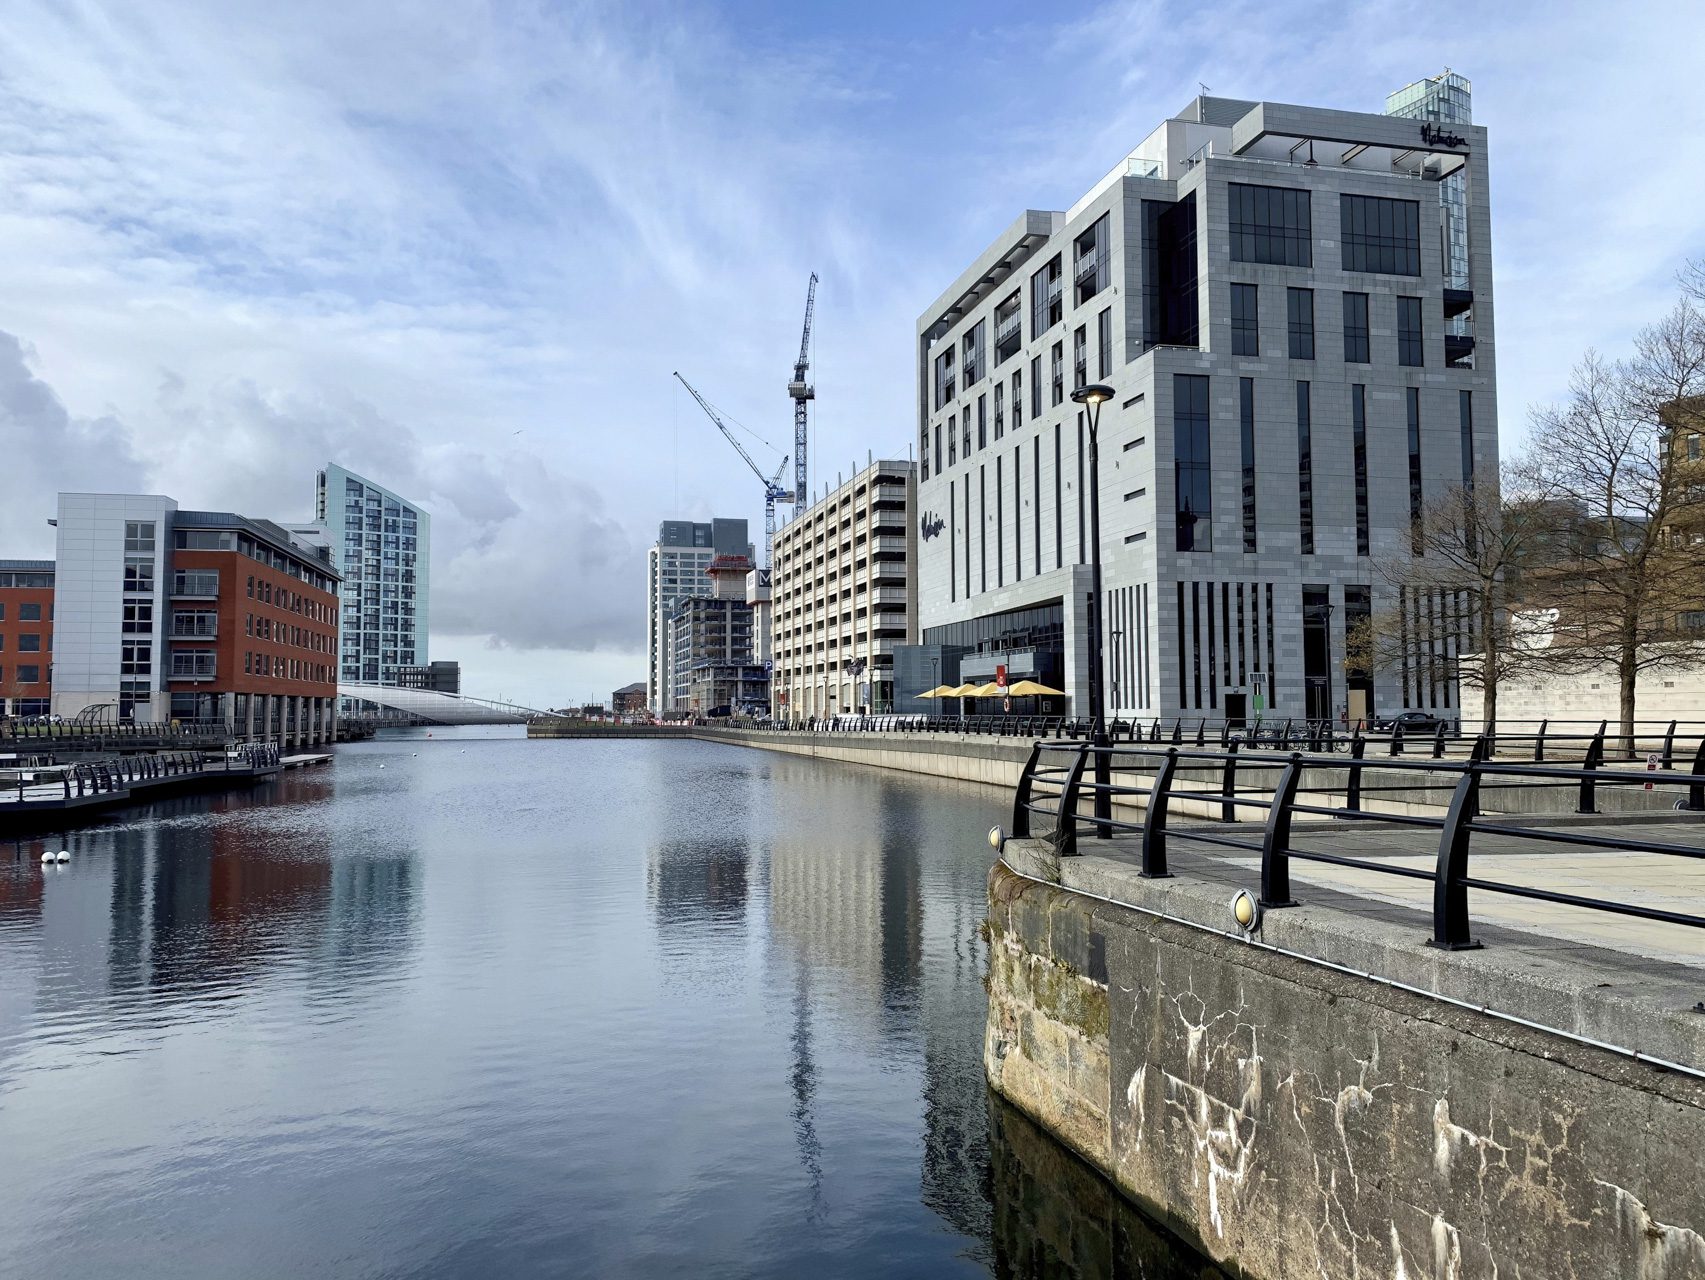 LIVERPOOL, UNITED KINGDOM - Apr 03, 2019: A beautiful view of the modern regeneration of Princes Dock in Liverpool, UK